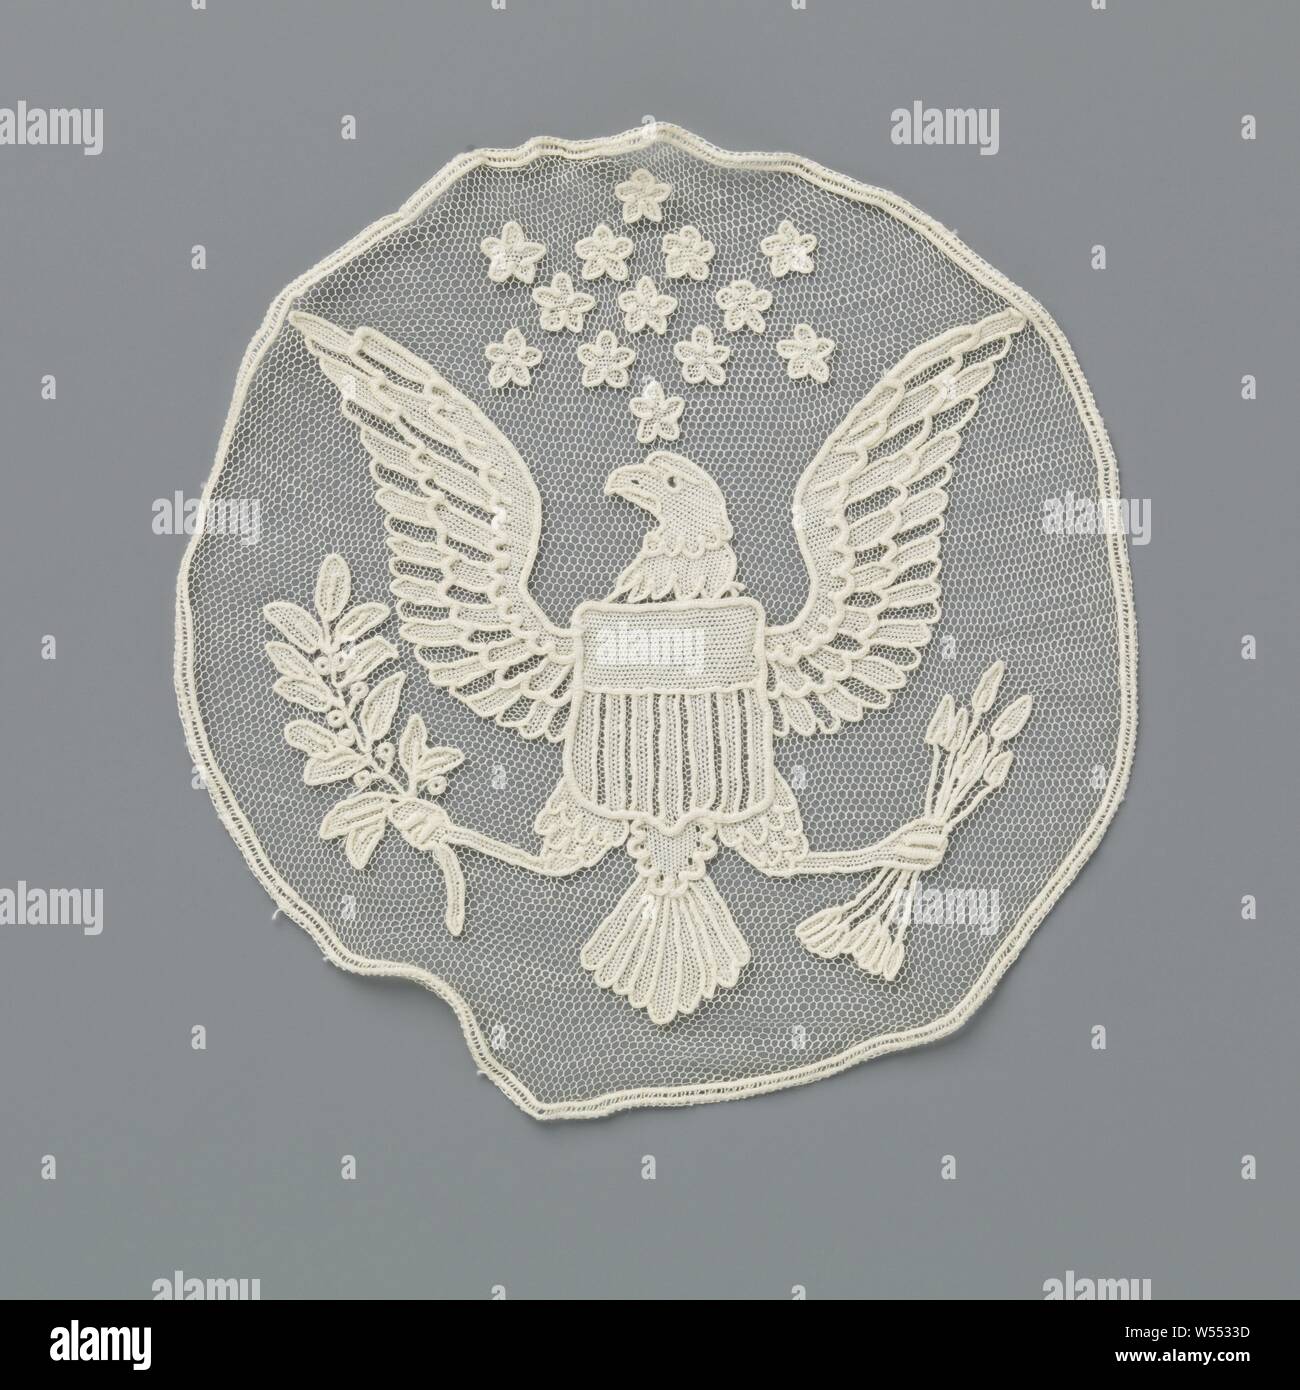 Insert of needle lace with the arms of the US, Insert of natural colored needle lace: war lace. Round model with the arms of the United States of America, with an eagle and stars. The insert was intended for a tablecloth on which the arms of the Allies would stand, with the theme of the Peace of Versailles, armorial bearing, heraldry, anonymous, Belgium, in or after 1914 - c. 1918, linen (material), d 14 cm Stock Photo